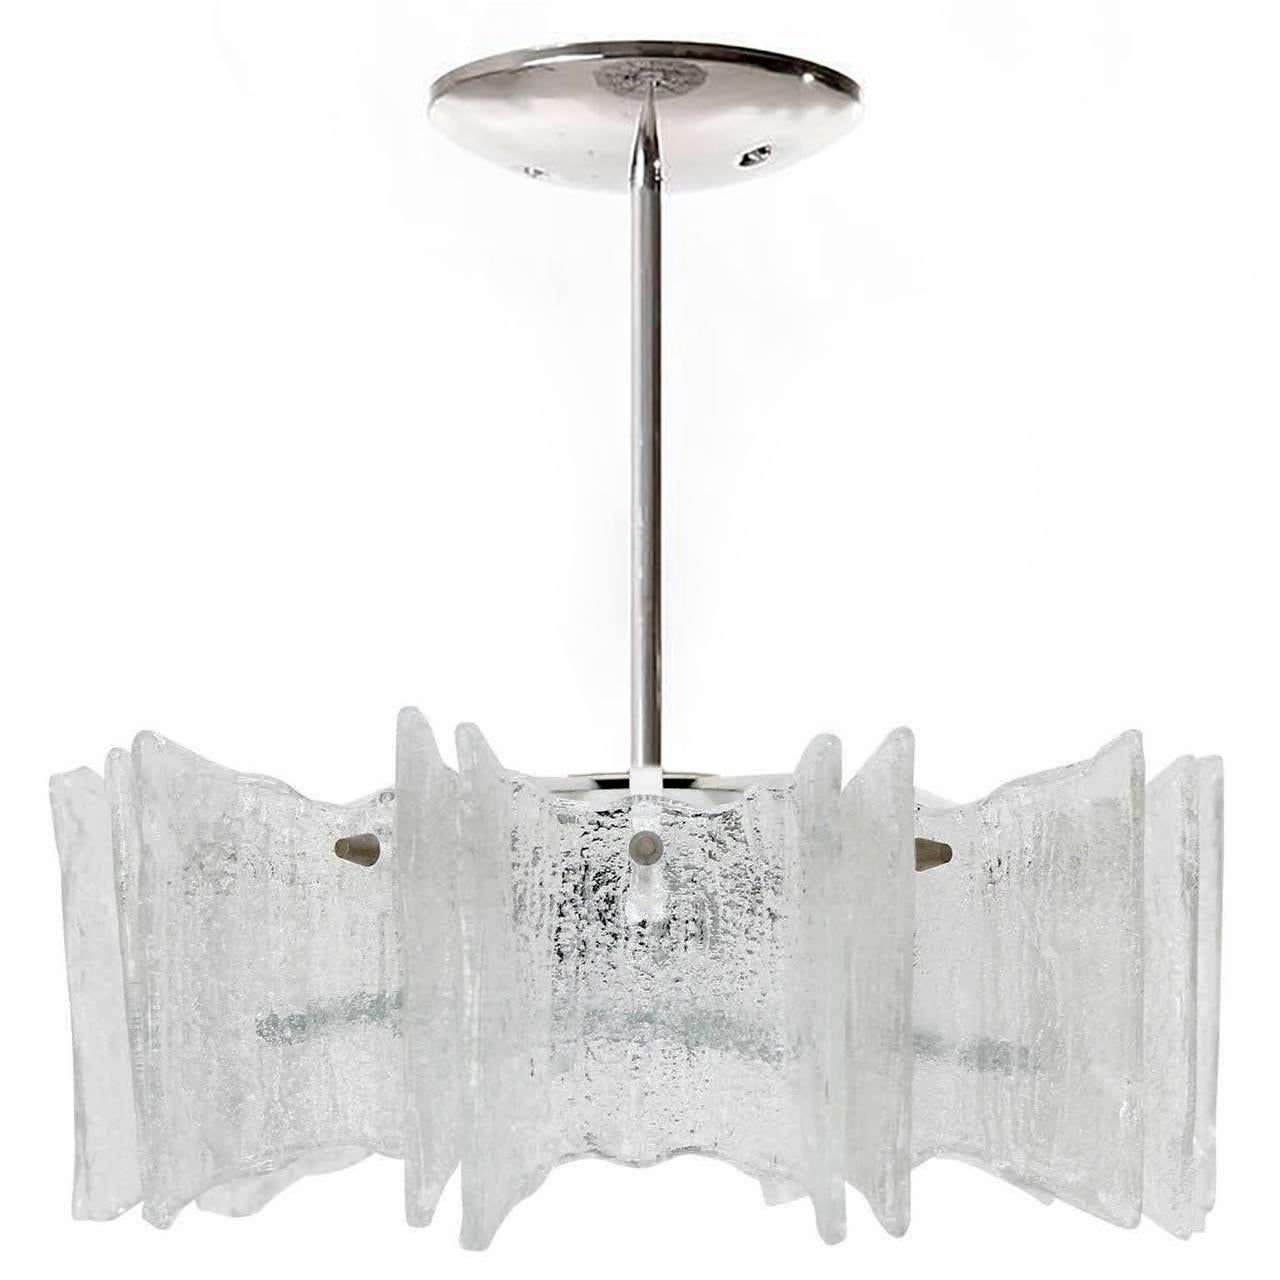 A beautiful star-shaped light fixture by Kalmar Vienna, Austria, manufactured in midcentury, circa 1970 (late 1960s or early 1970s).
Only one light is available.
It is made of frosted clear glass, a white lacquered frame, and nickel-plated (chrome)